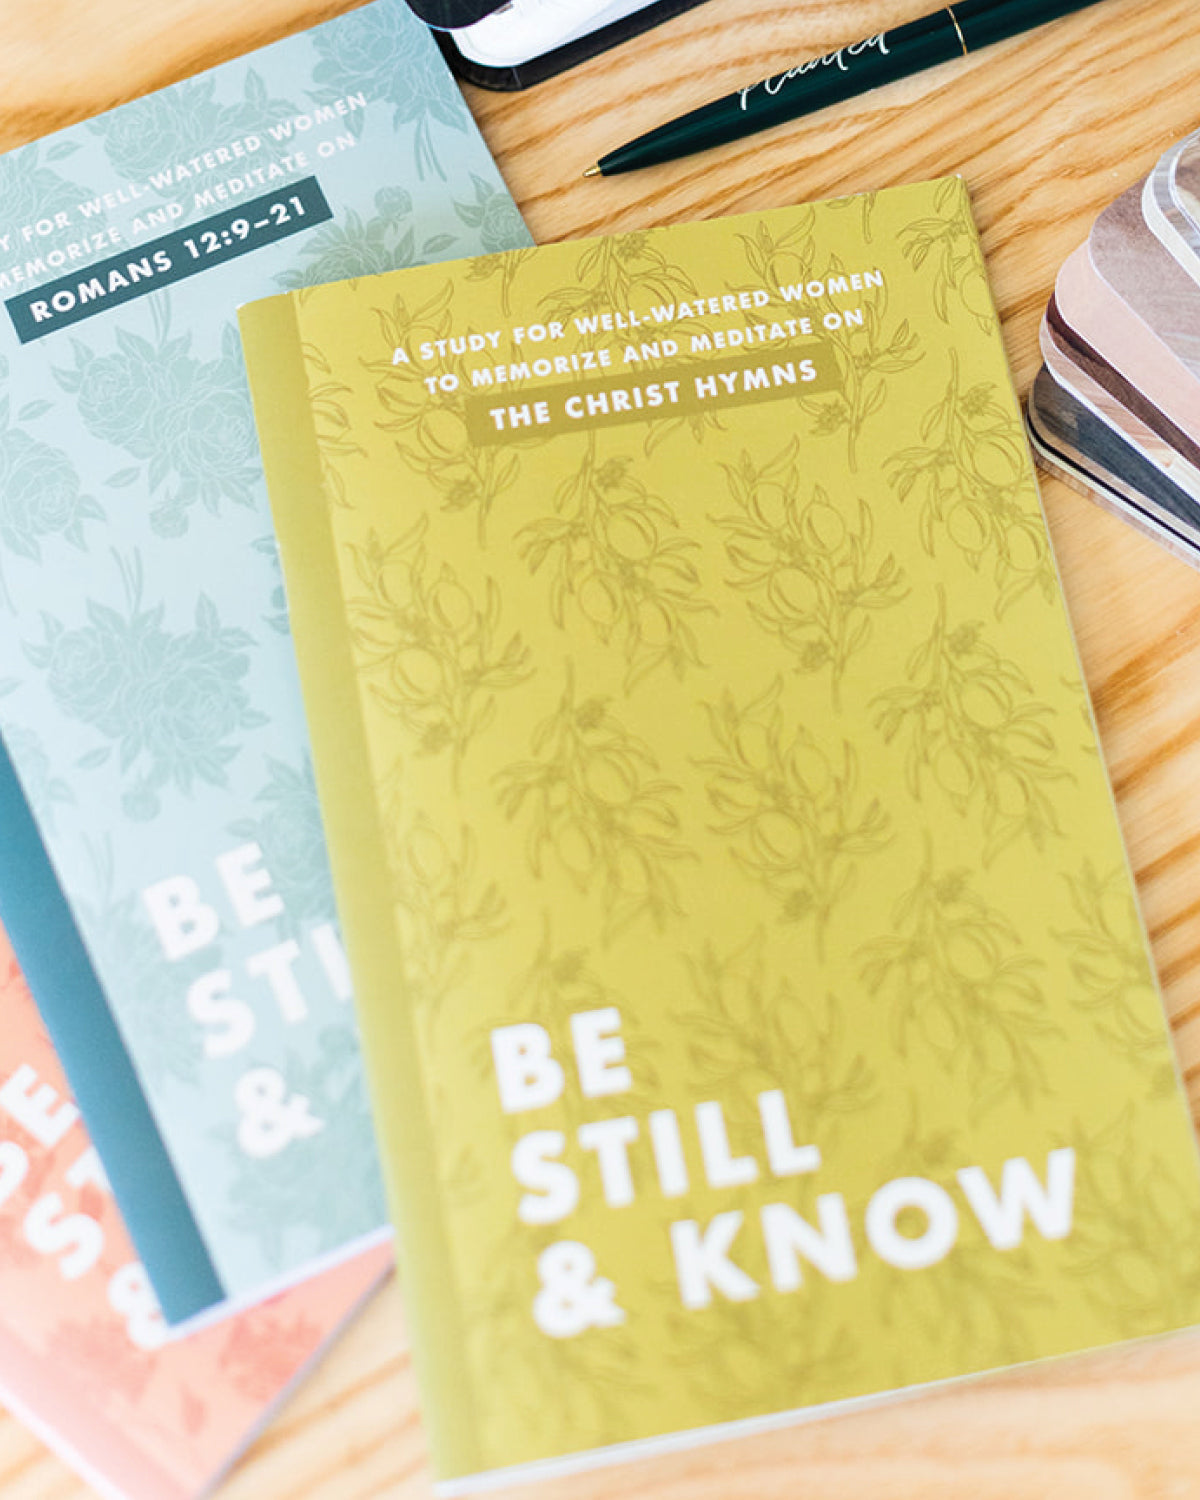 Be Still & Know Study: The Christ Hymns